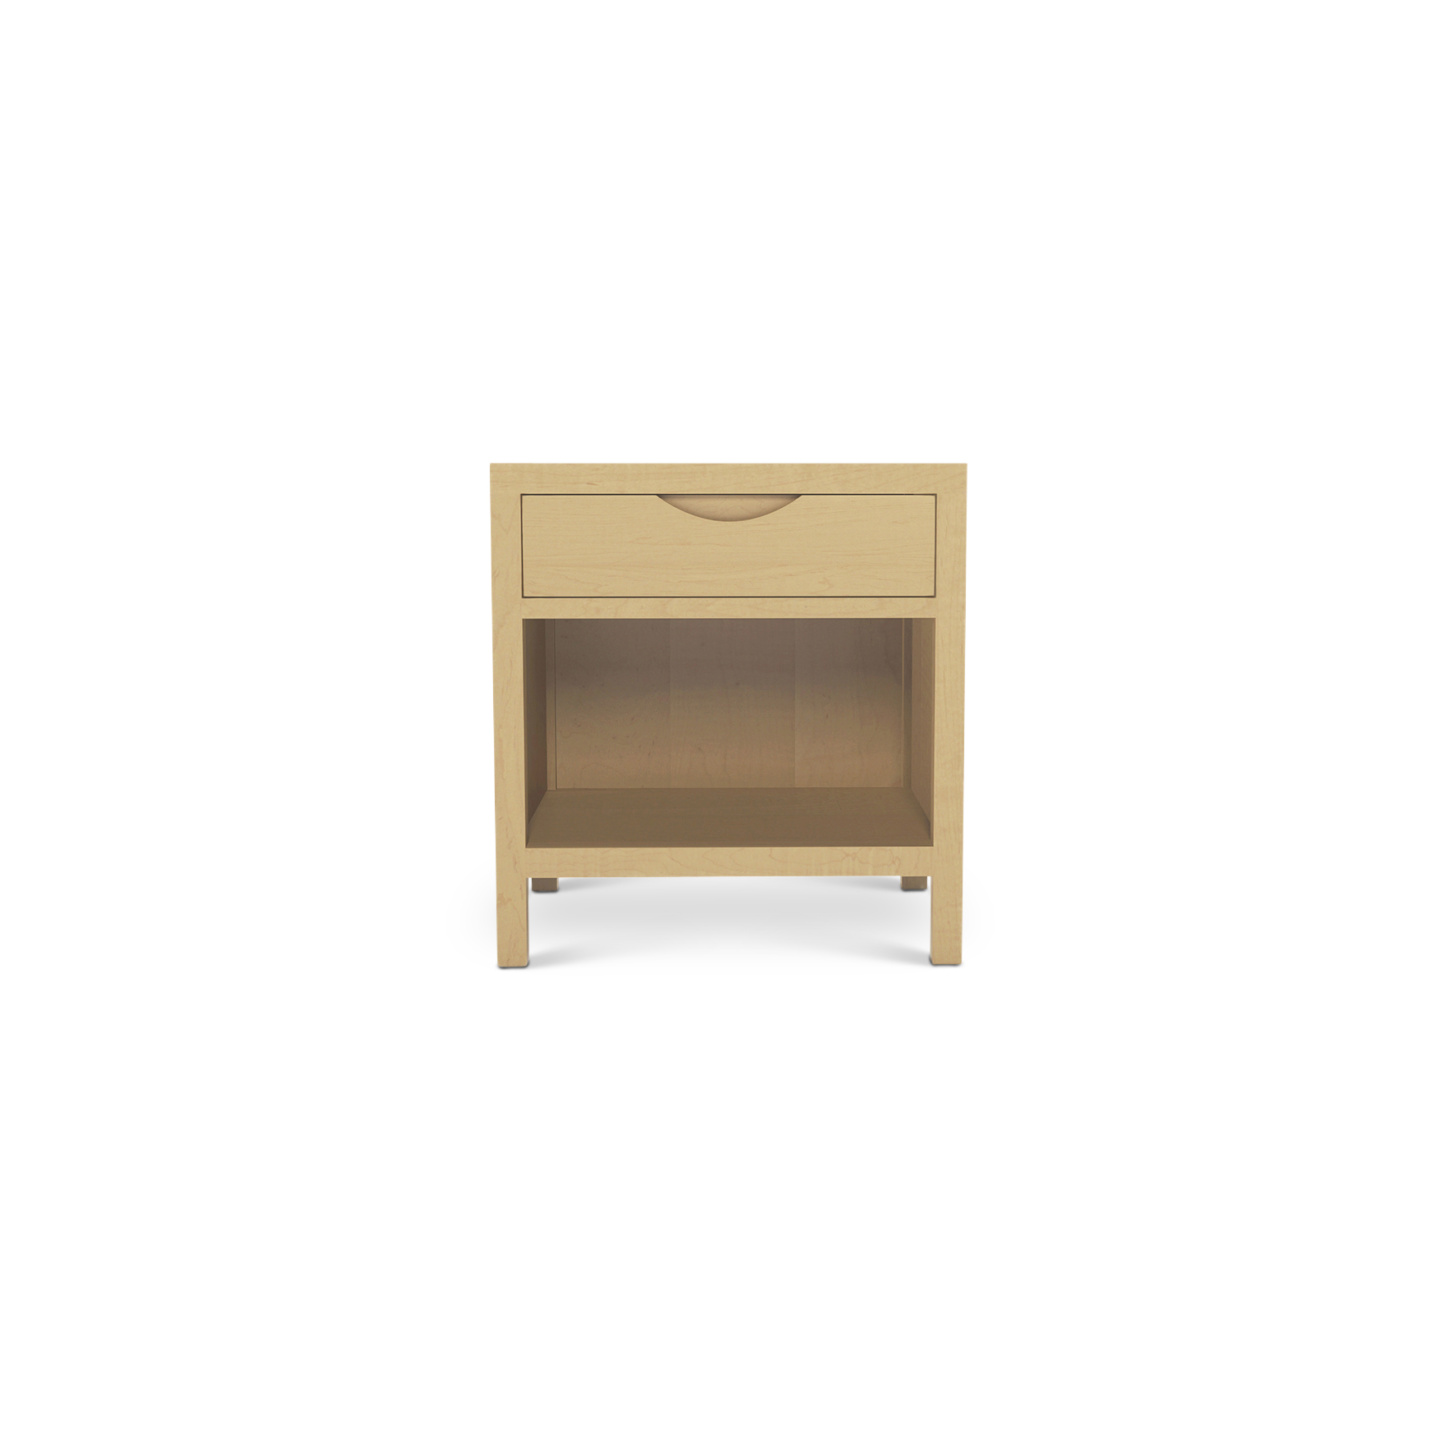 Small American made maple nightstand